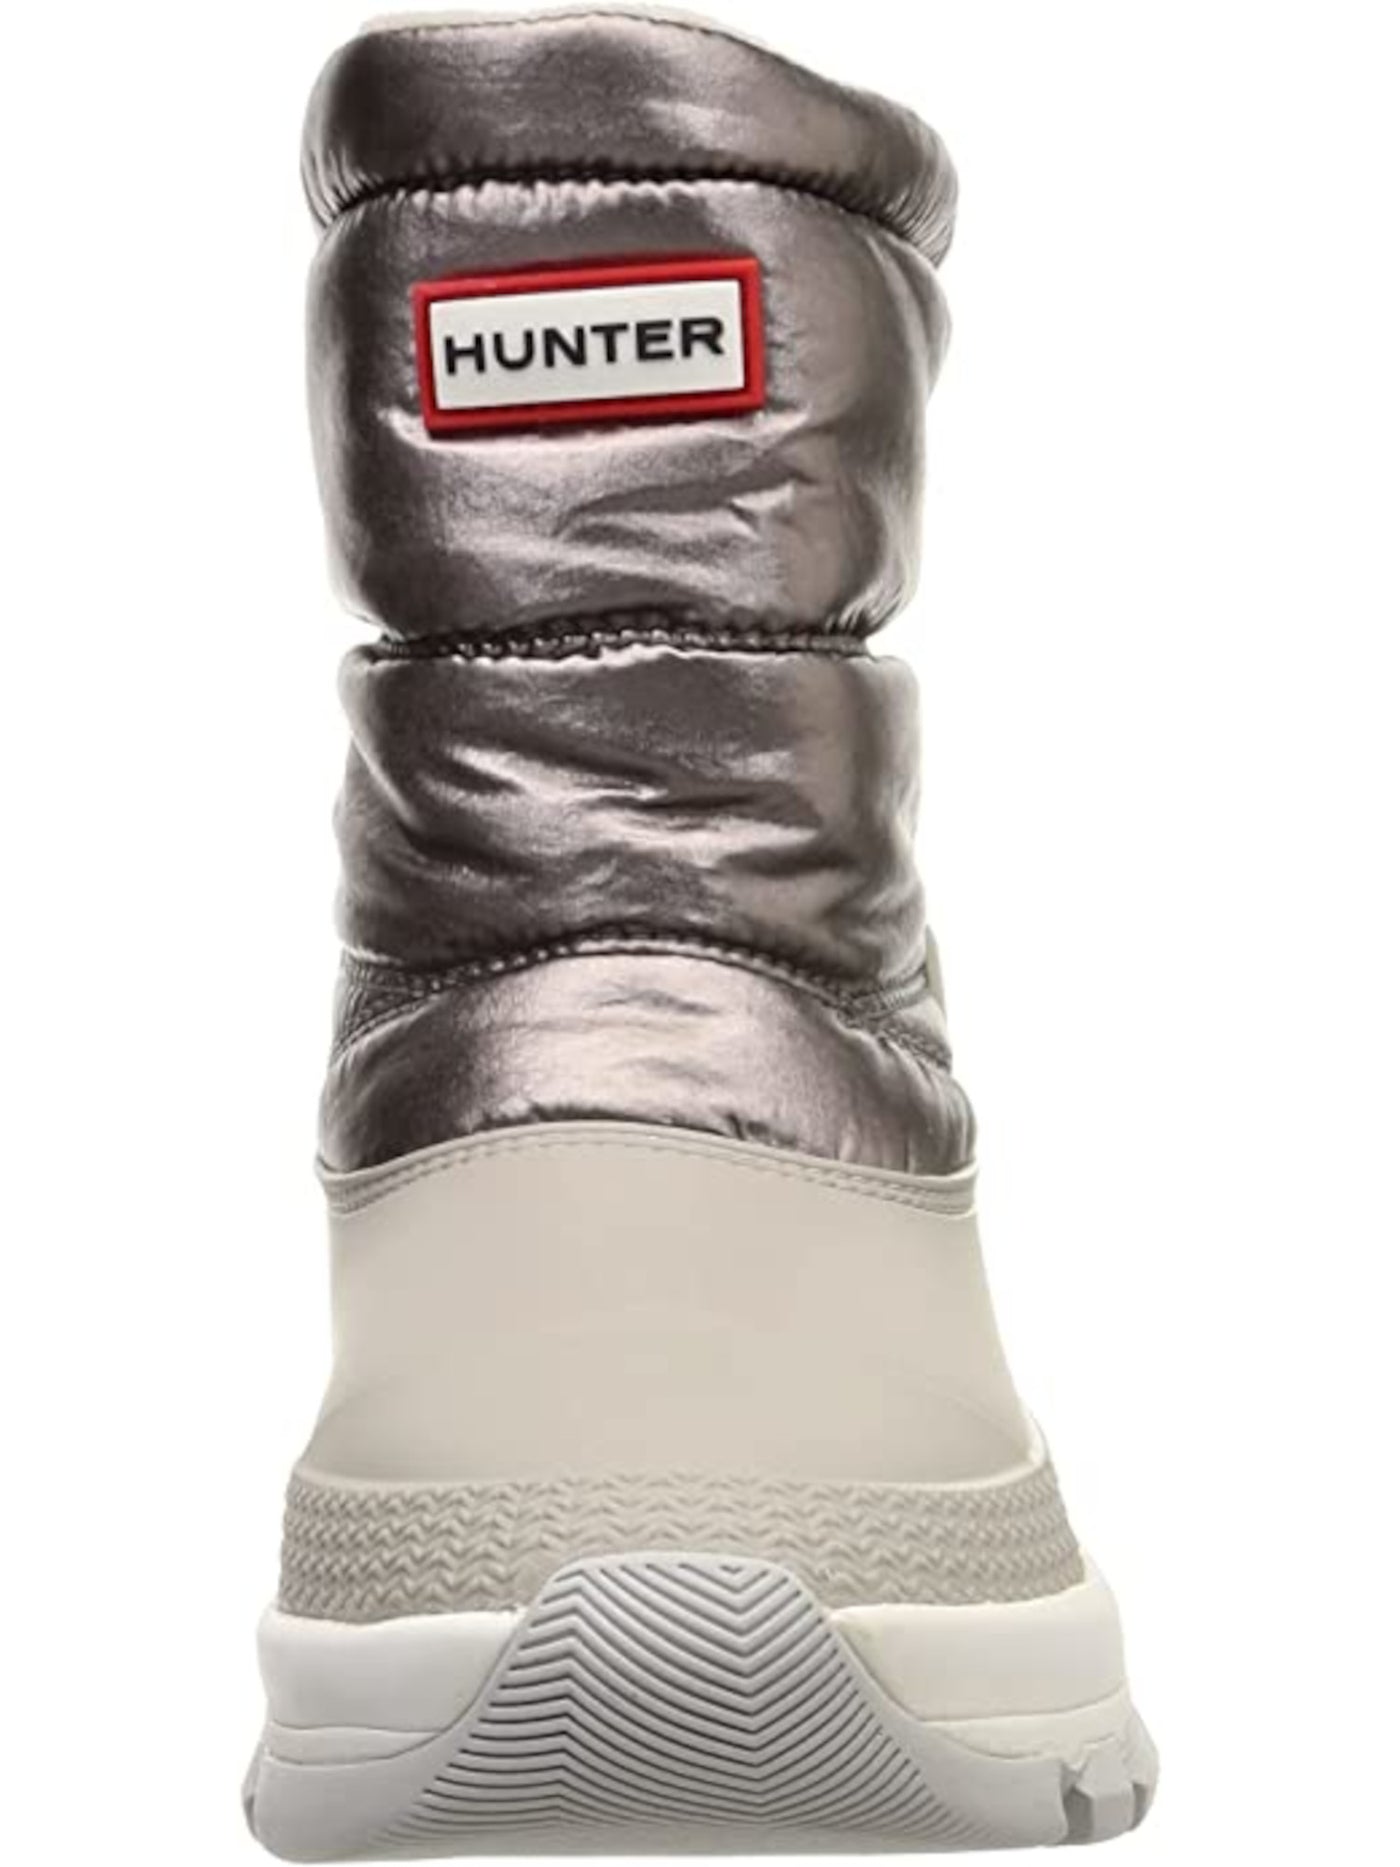 HUNTER Womens Silver Insulated Logo Breathable Waterproof Round Toe Wedge Snow Boots 6